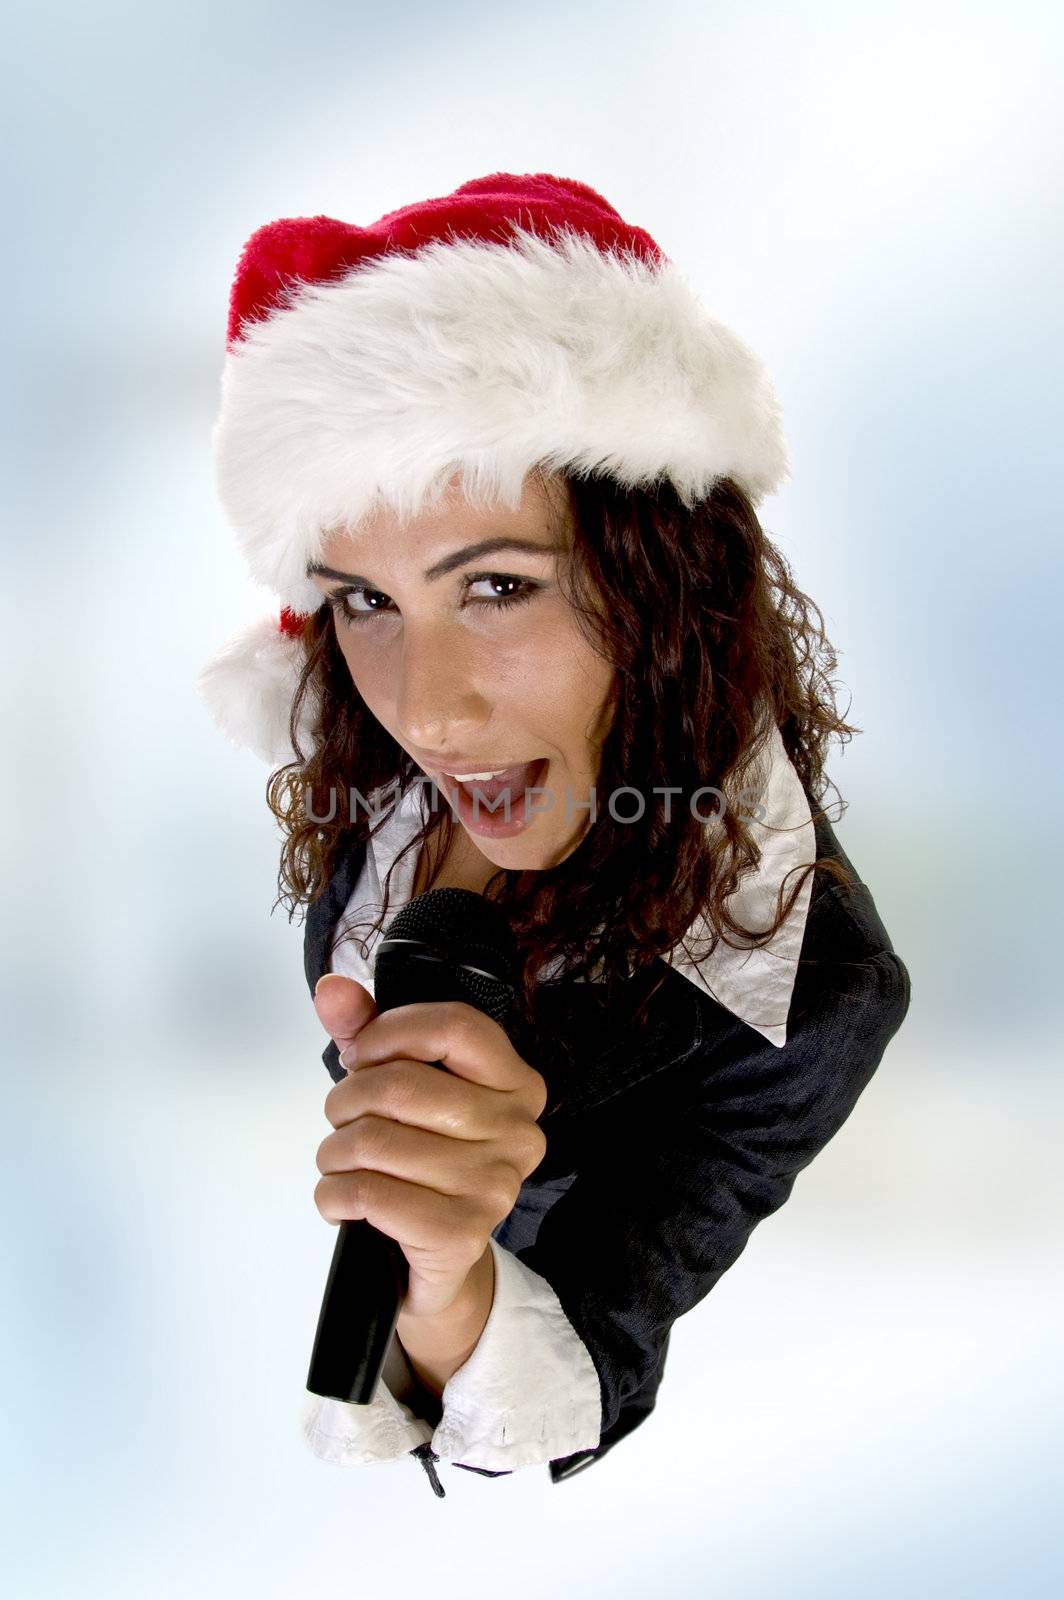 lady wearing christmas hat and singing into microphone by imagerymajestic